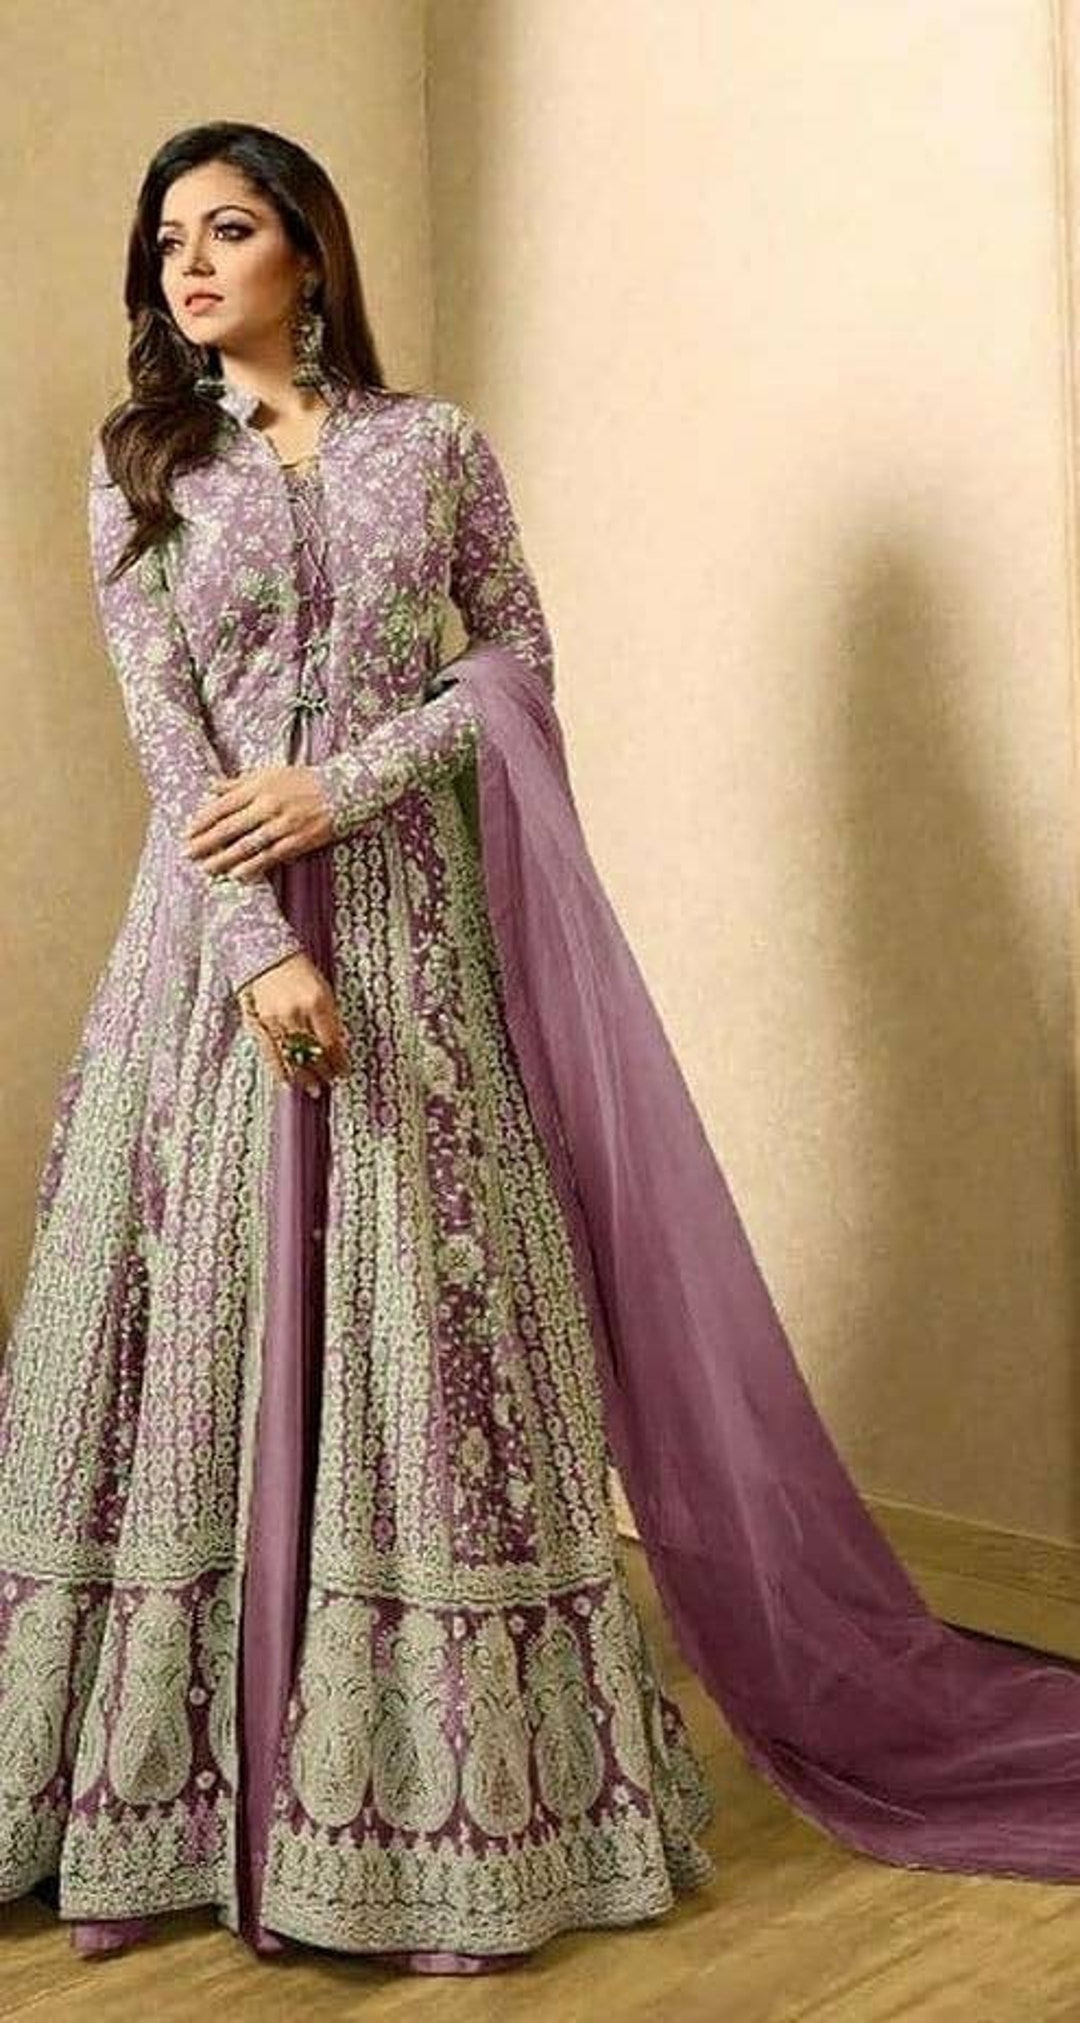 Buy Latest Indian Gown dress Online Shopping For Women – Joshindia